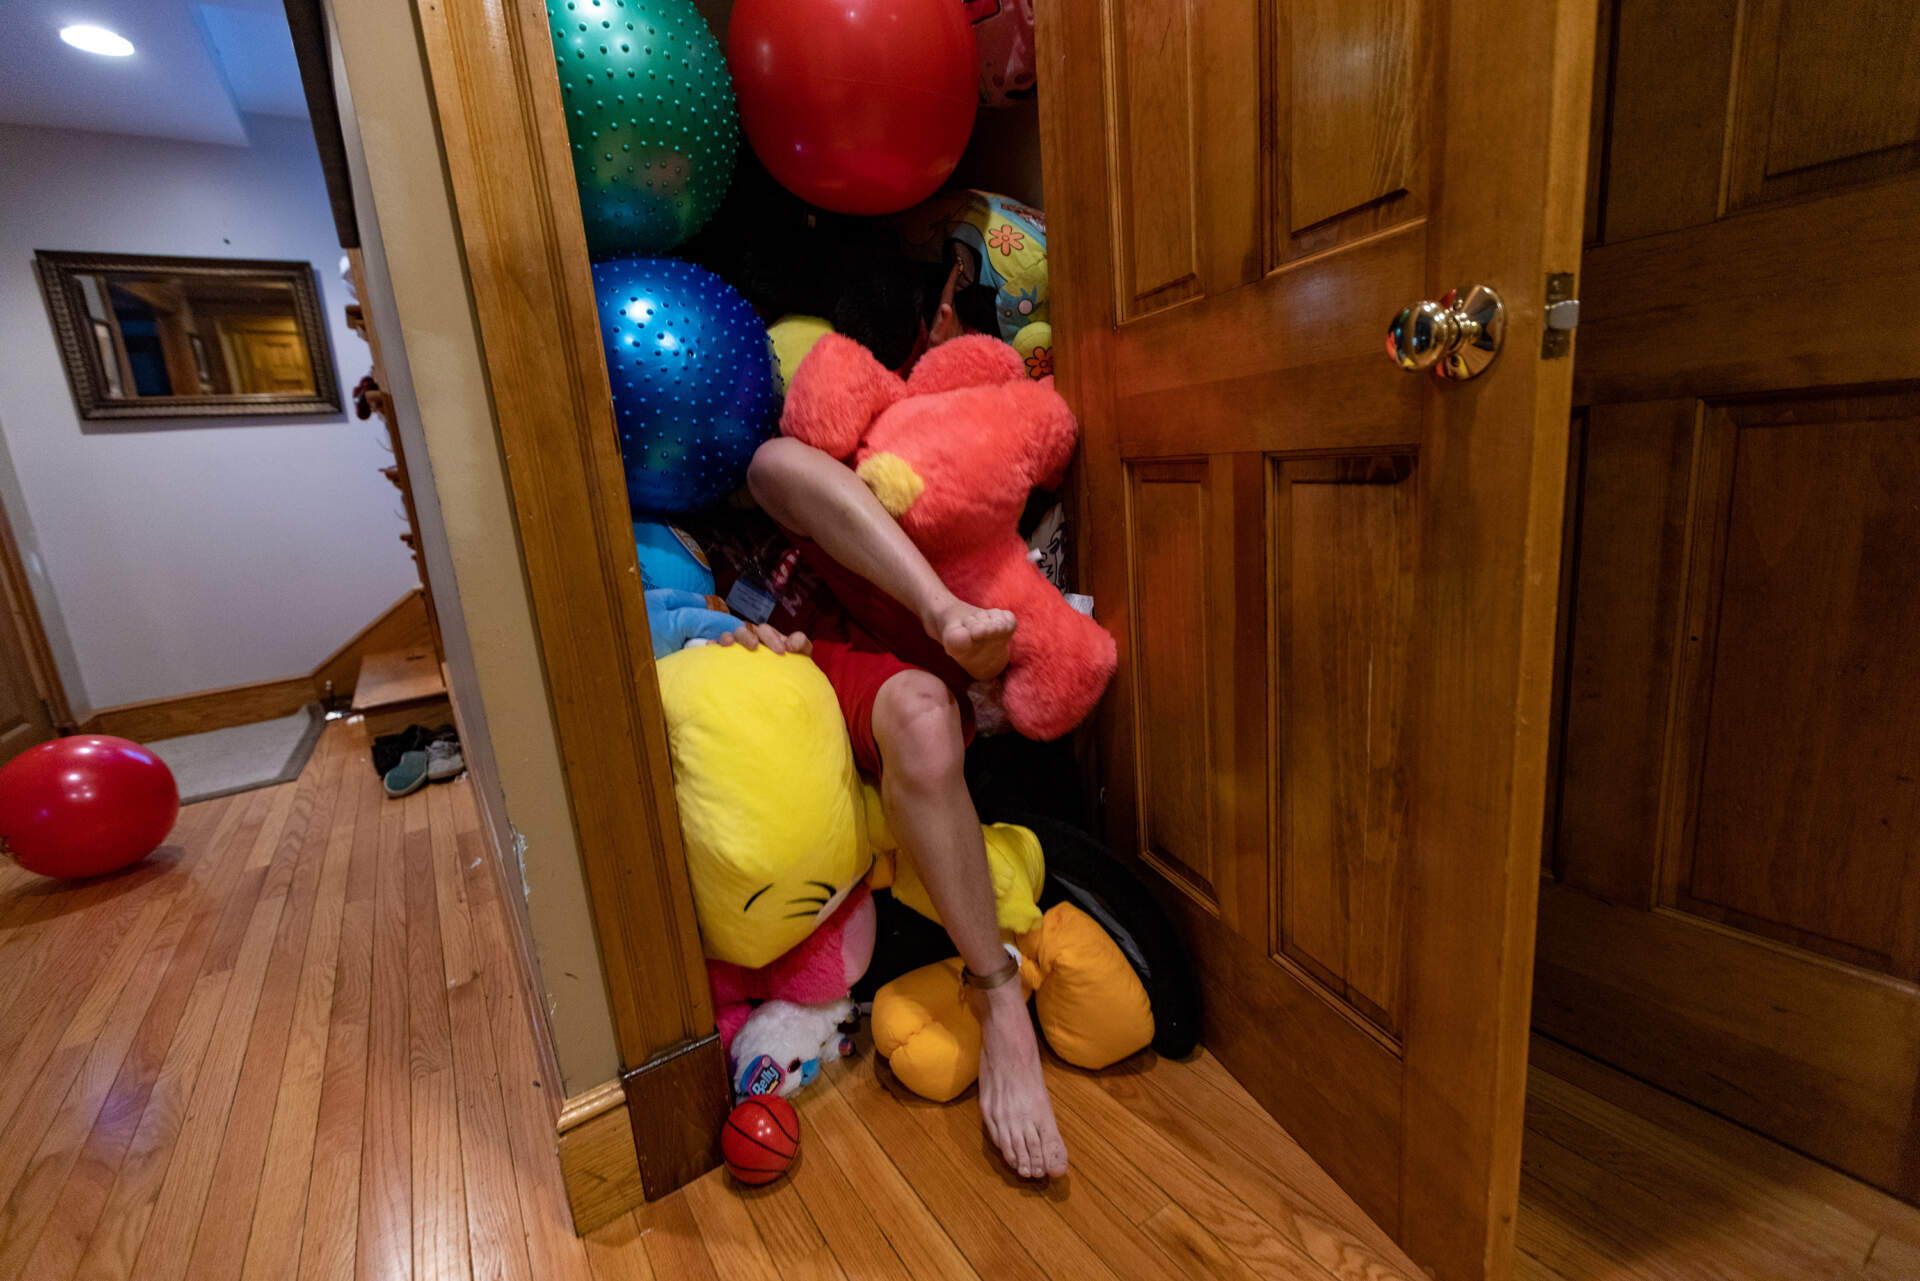 Connor Biscan climbs into the sensory closet at his family home. It's filled with plushy toy animals and balls. (Jesse Costa/WBUR)